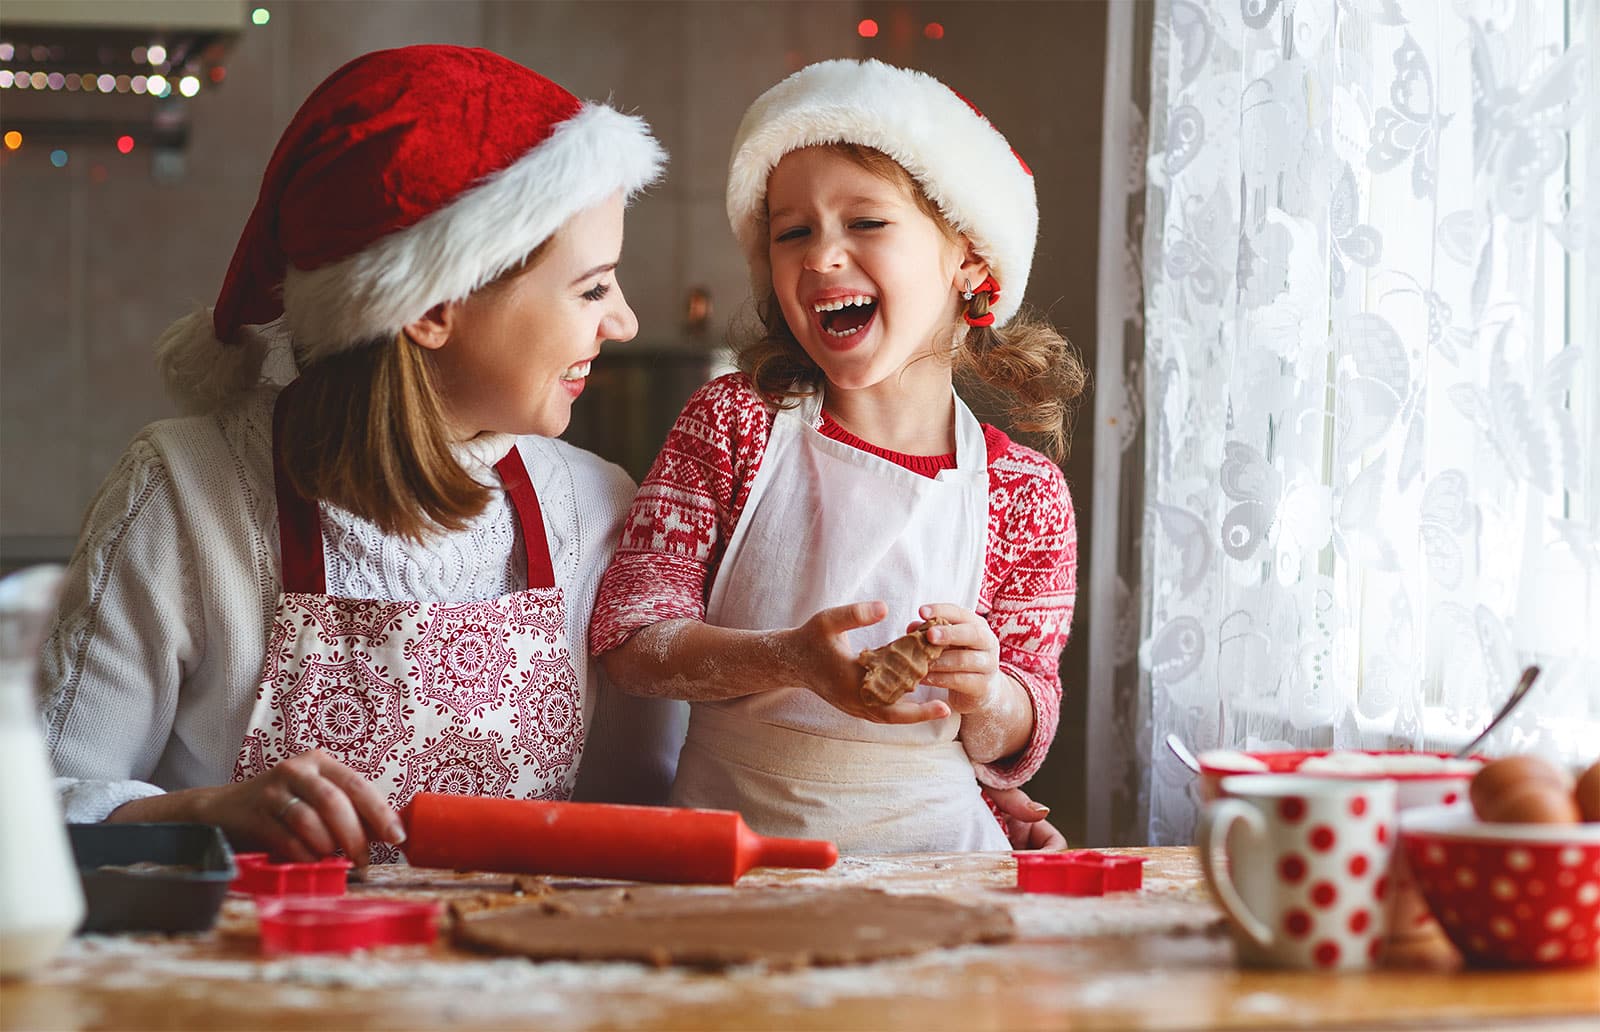 The Holidays in Brentwood! Holiday Cookie Recipes to Try This Year